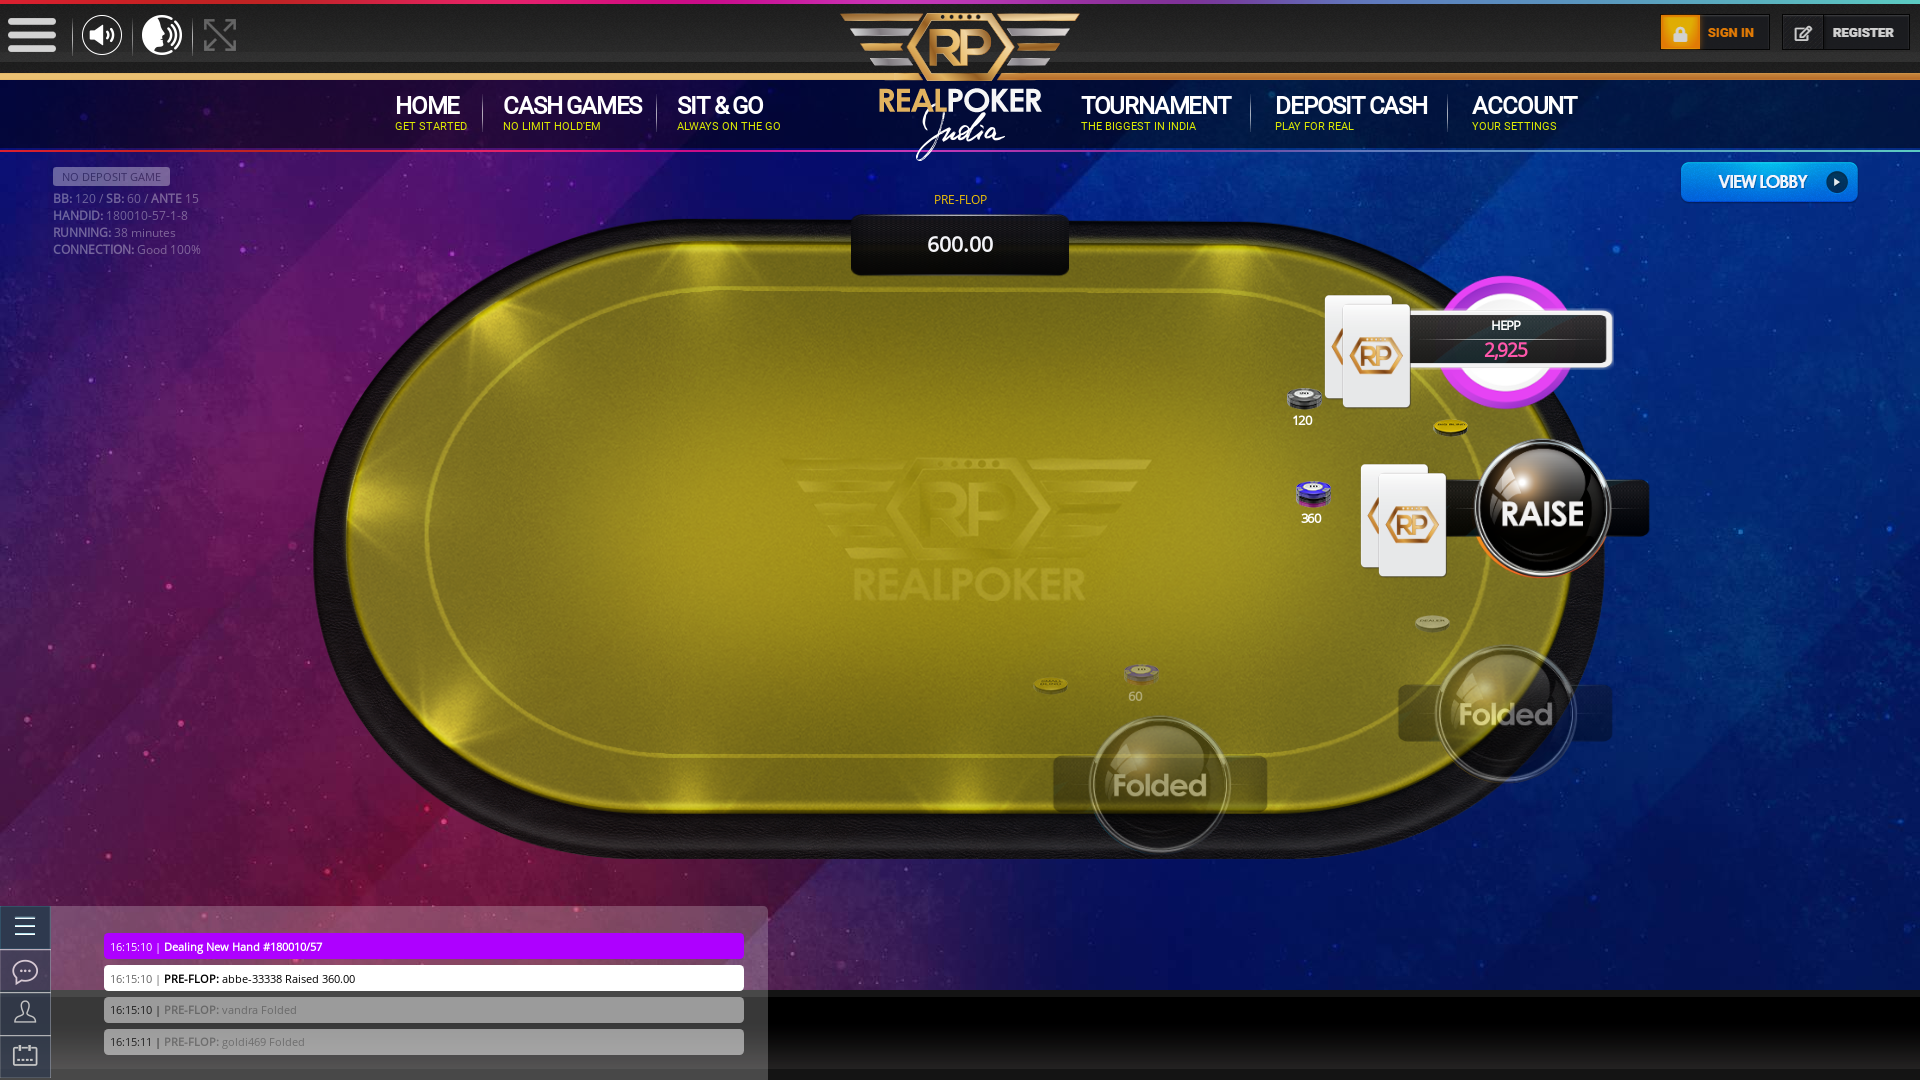 10 player texas holdem table at real poker with the table id 180010